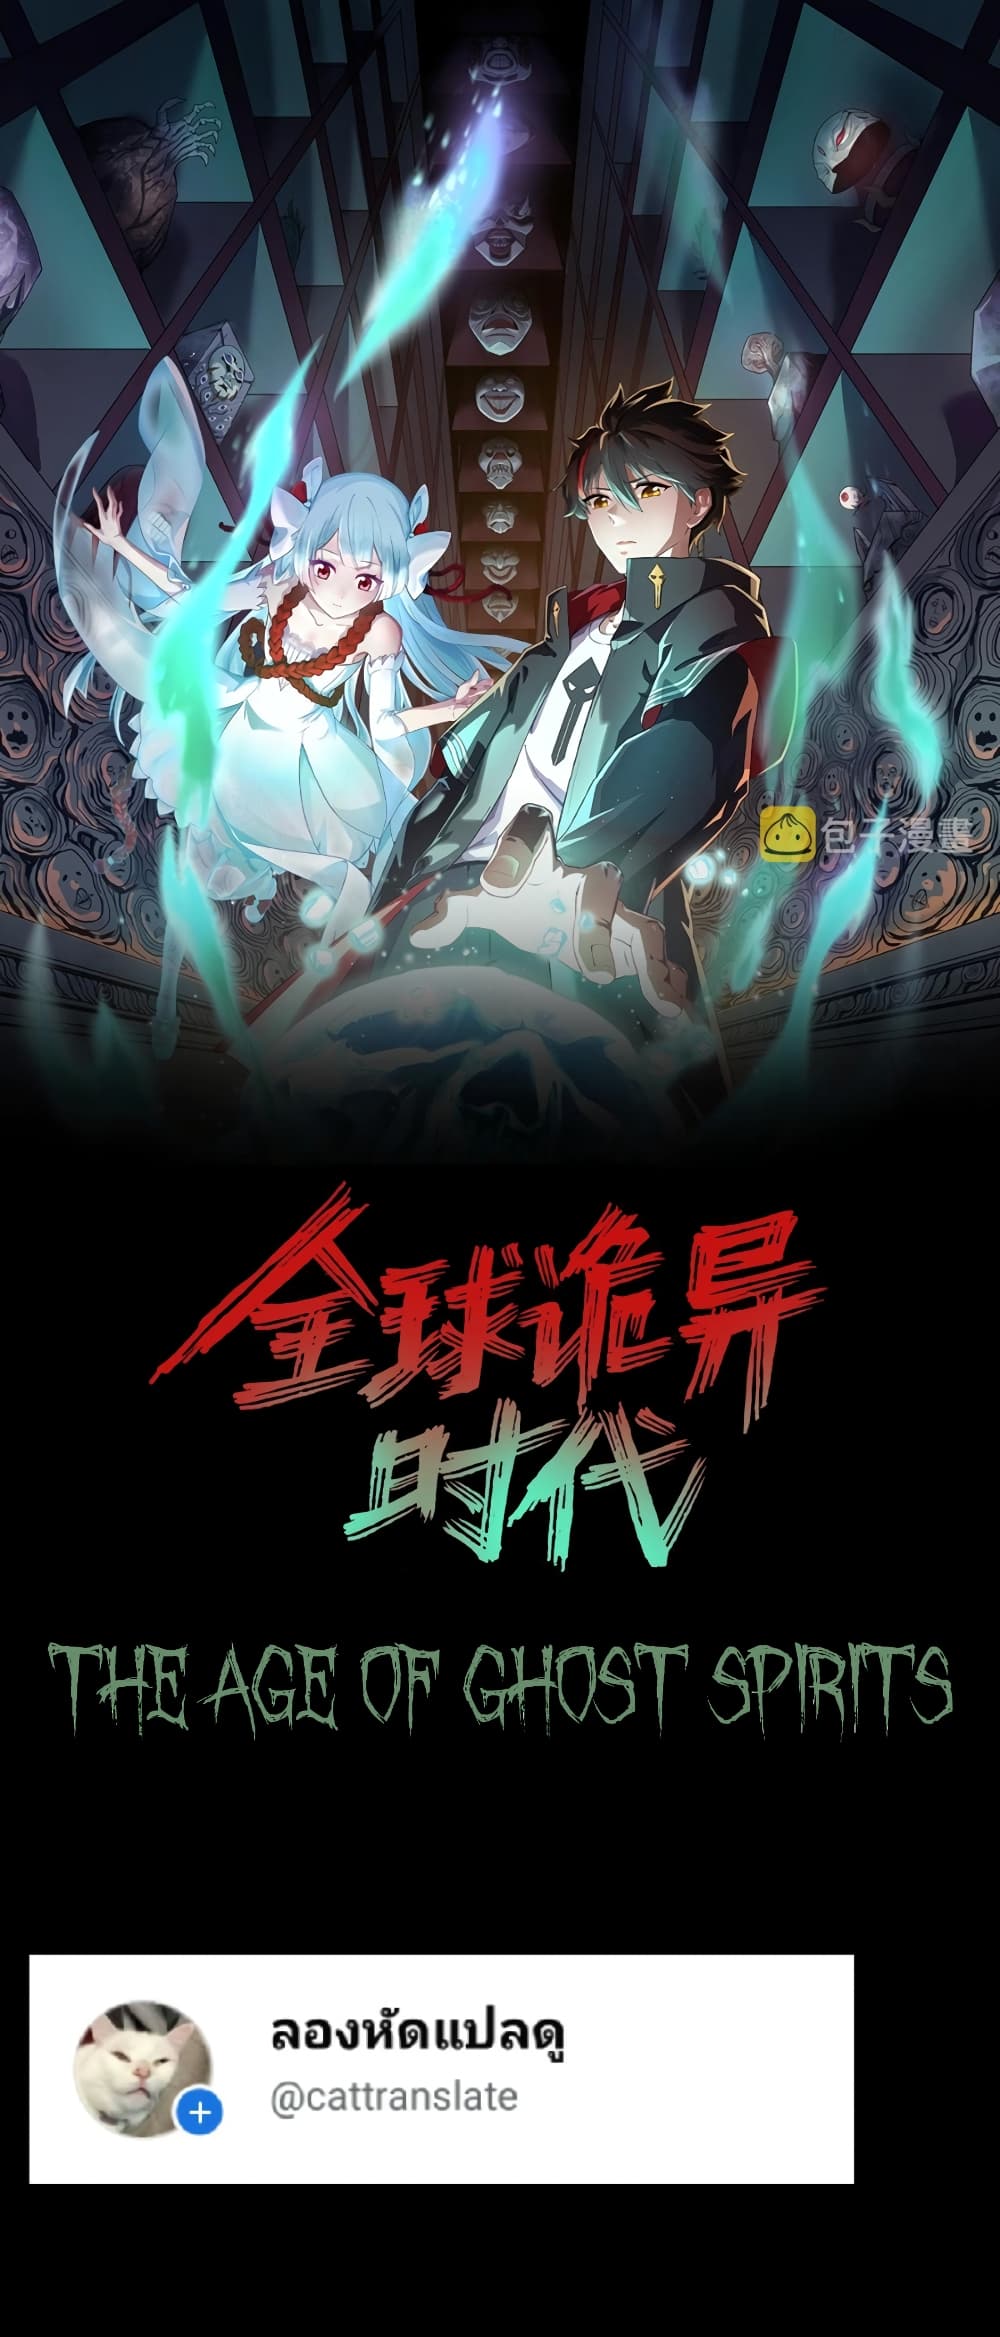 The Age of Ghost Spirits à¸à¸­à¸à¸à¸µà¹ 29 (1)